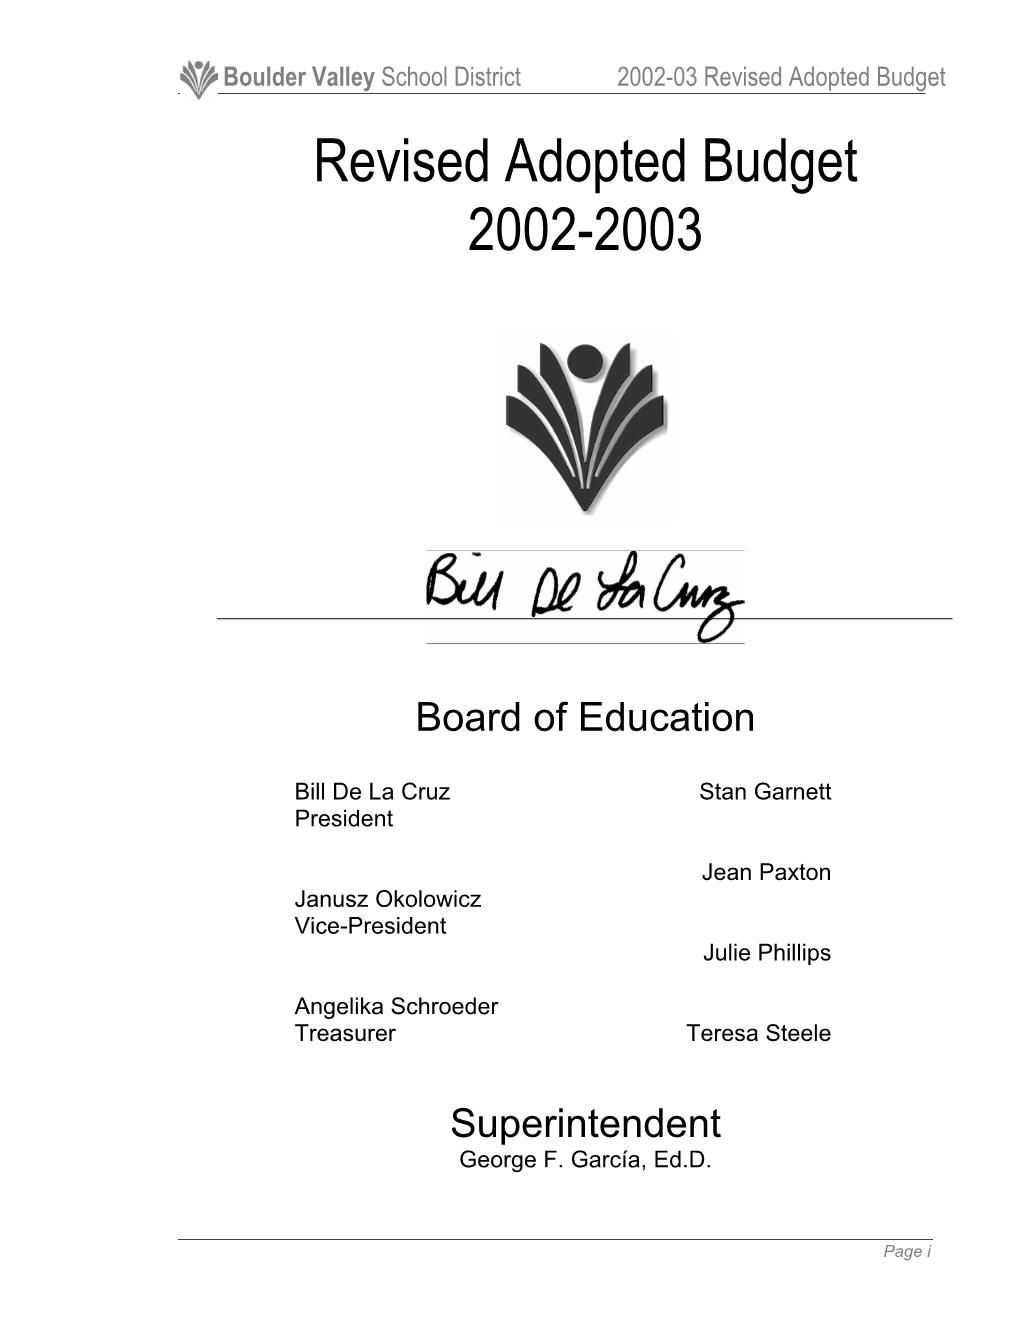 Revised Adopted Budget 2002-2003